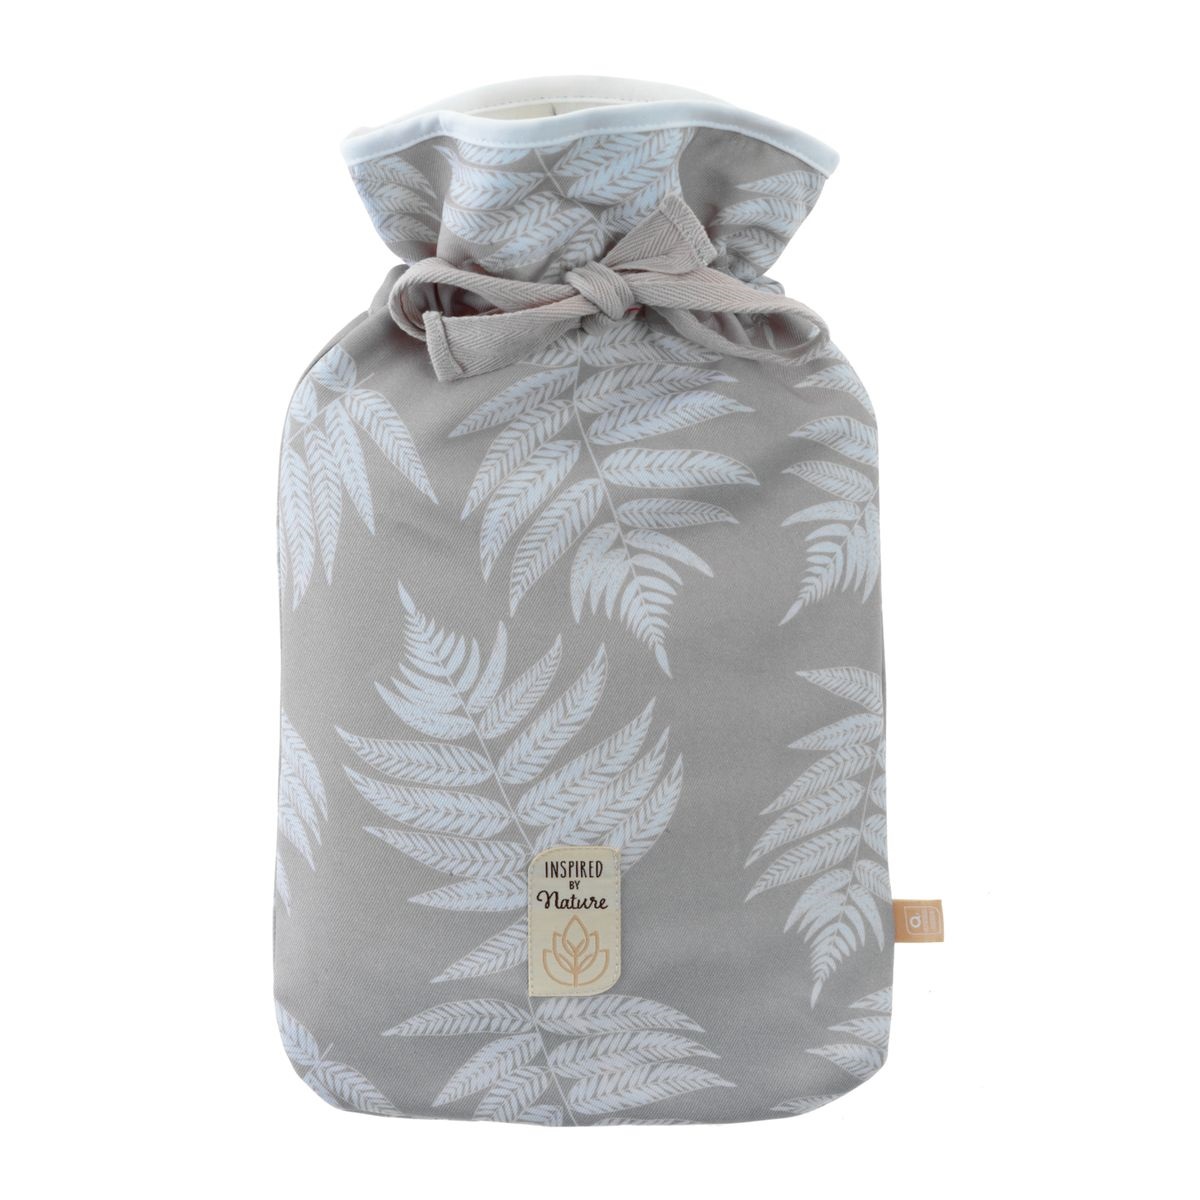 Aroma Home Hot Water Bottle 2L Nature Range Printed Stone Fern